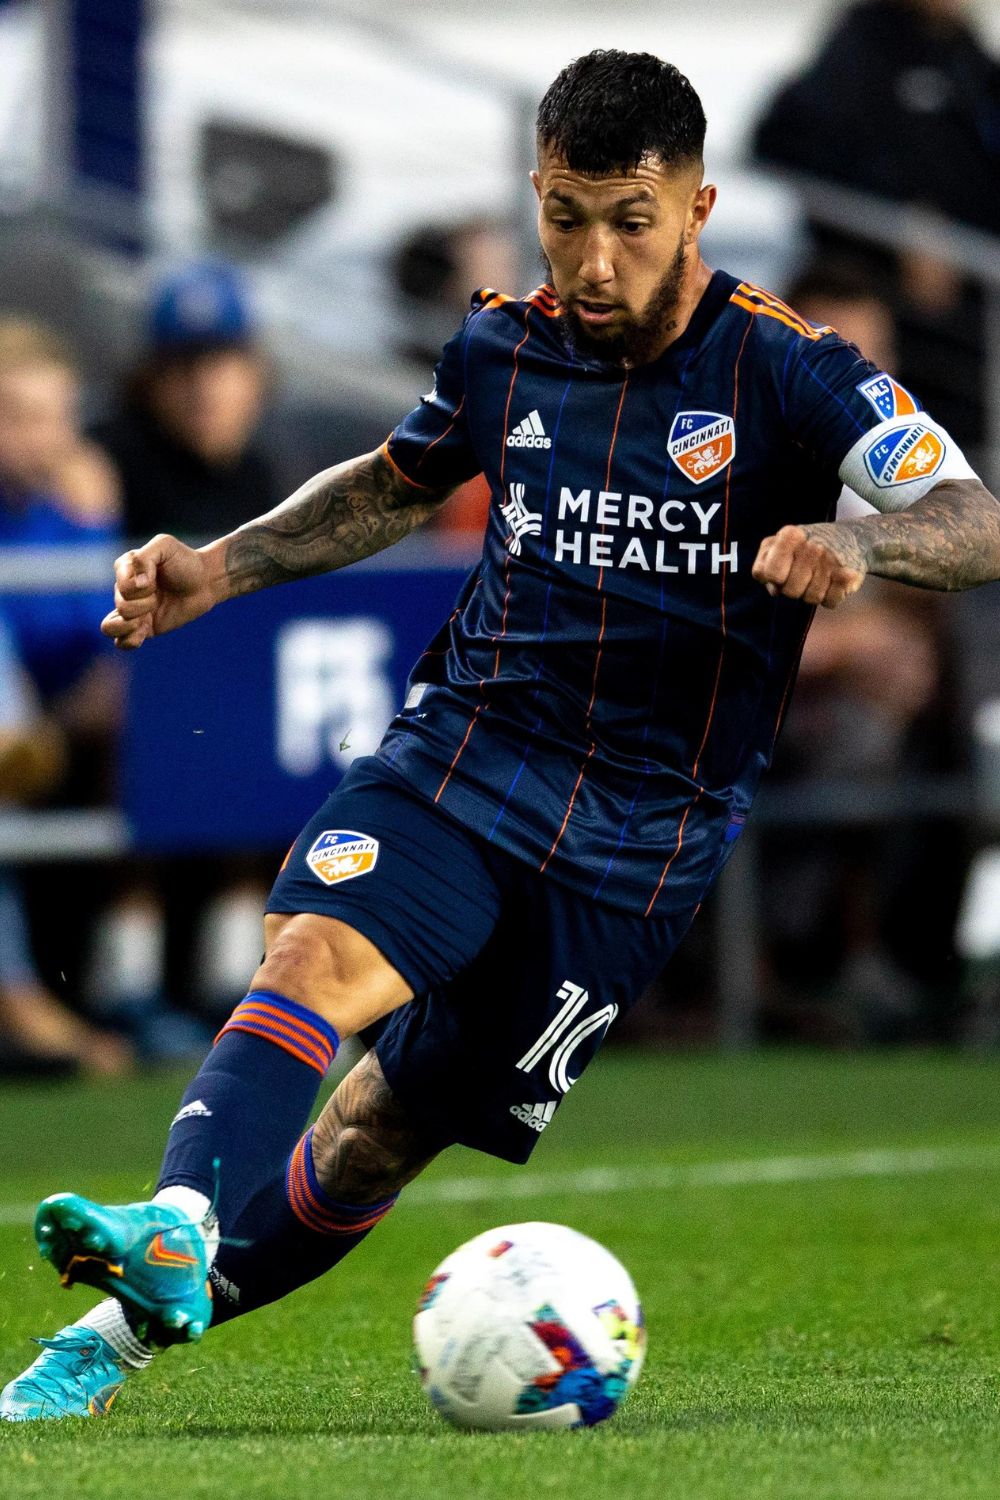 Luciano Acosta In The Match